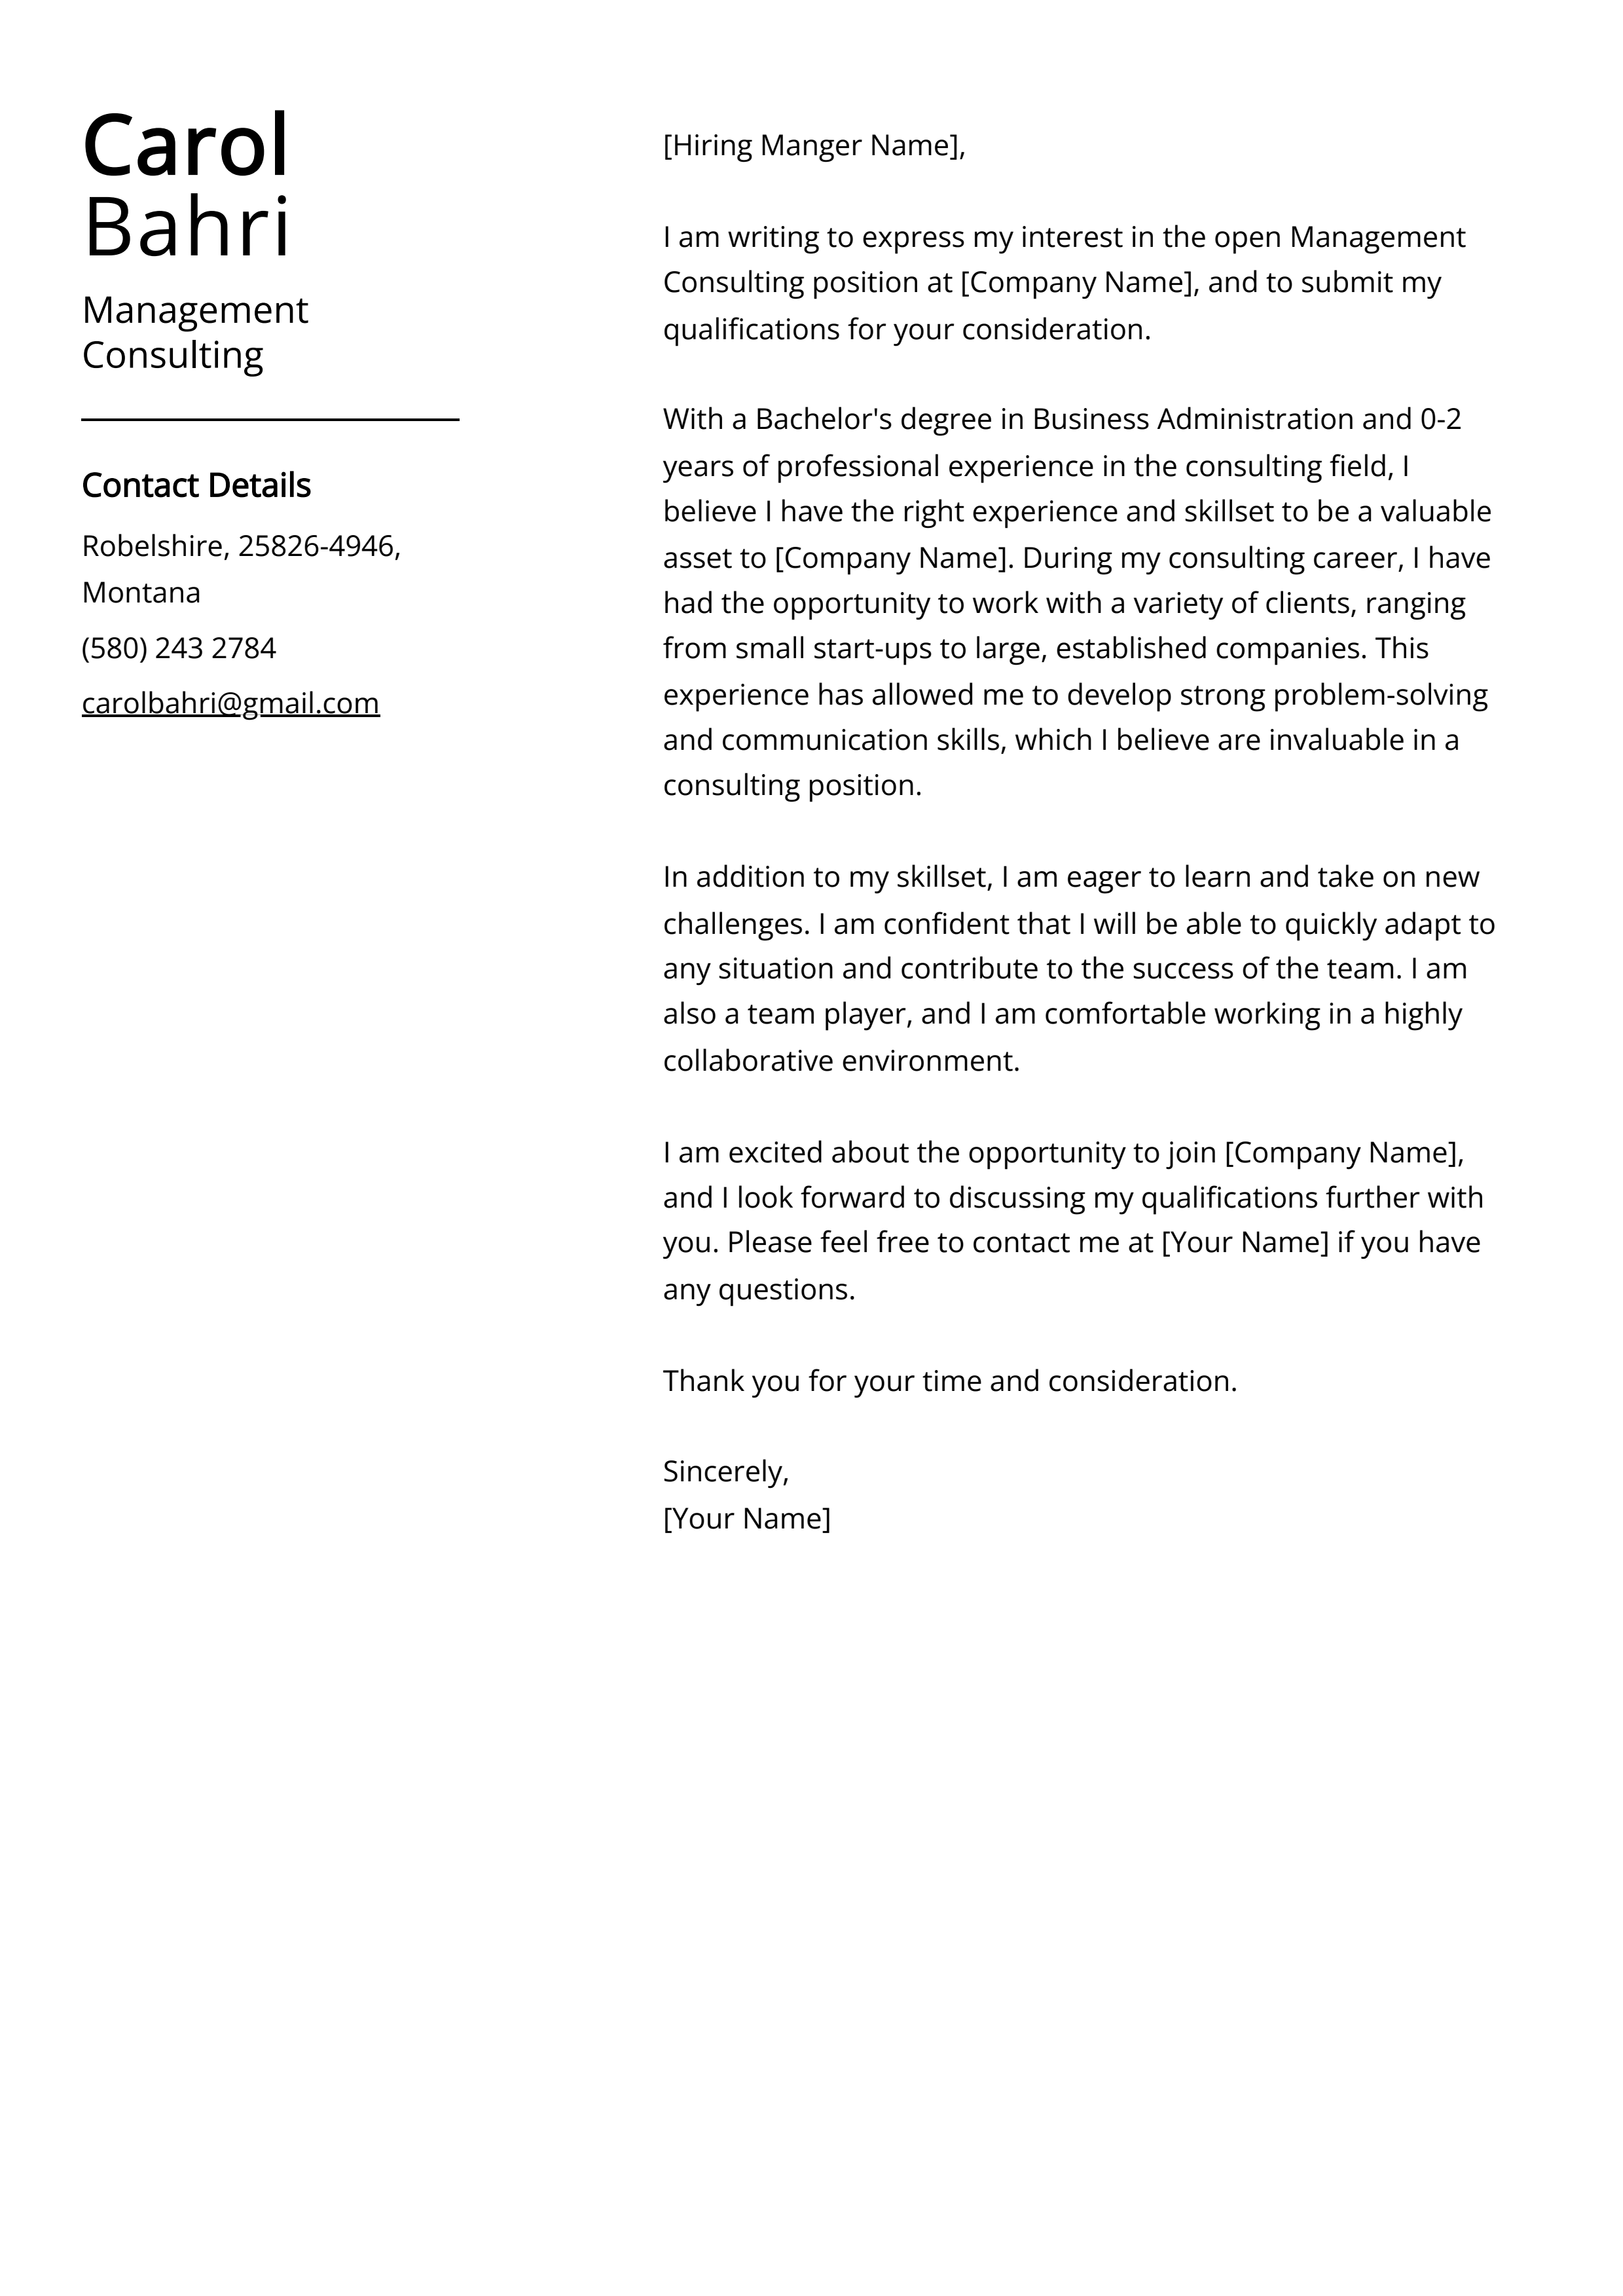 Management Consulting Cover Letter Example